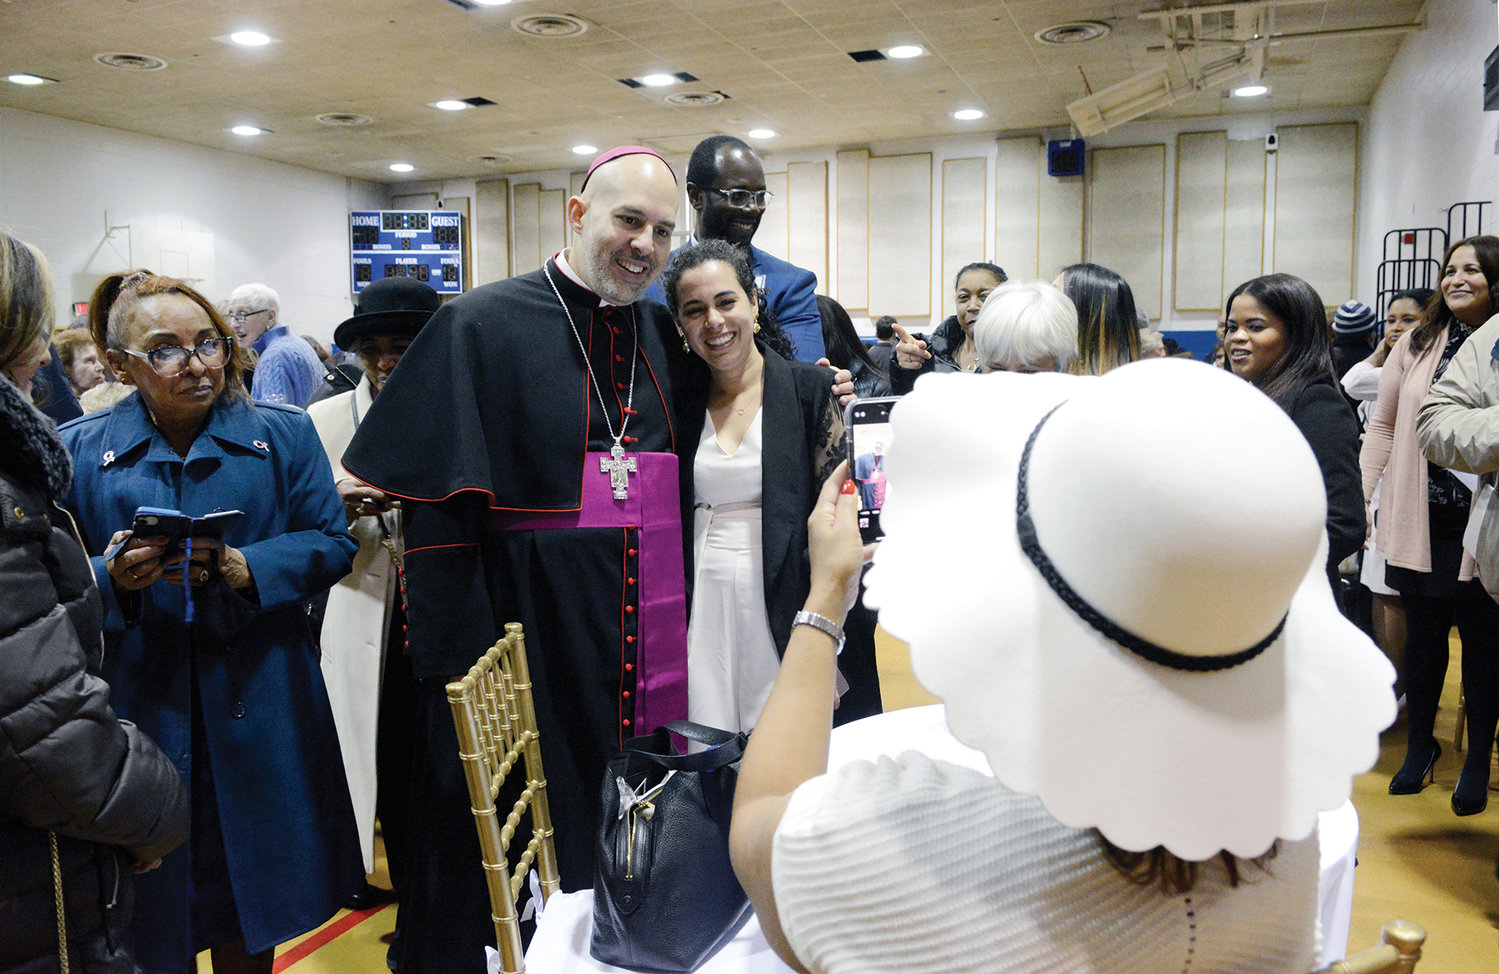 Auxiliary Bishop Joseph Espaillat enthusiastically poses for photos at a reception at Cathedral High School in the New York Catholic Center in Manhattan March 1.